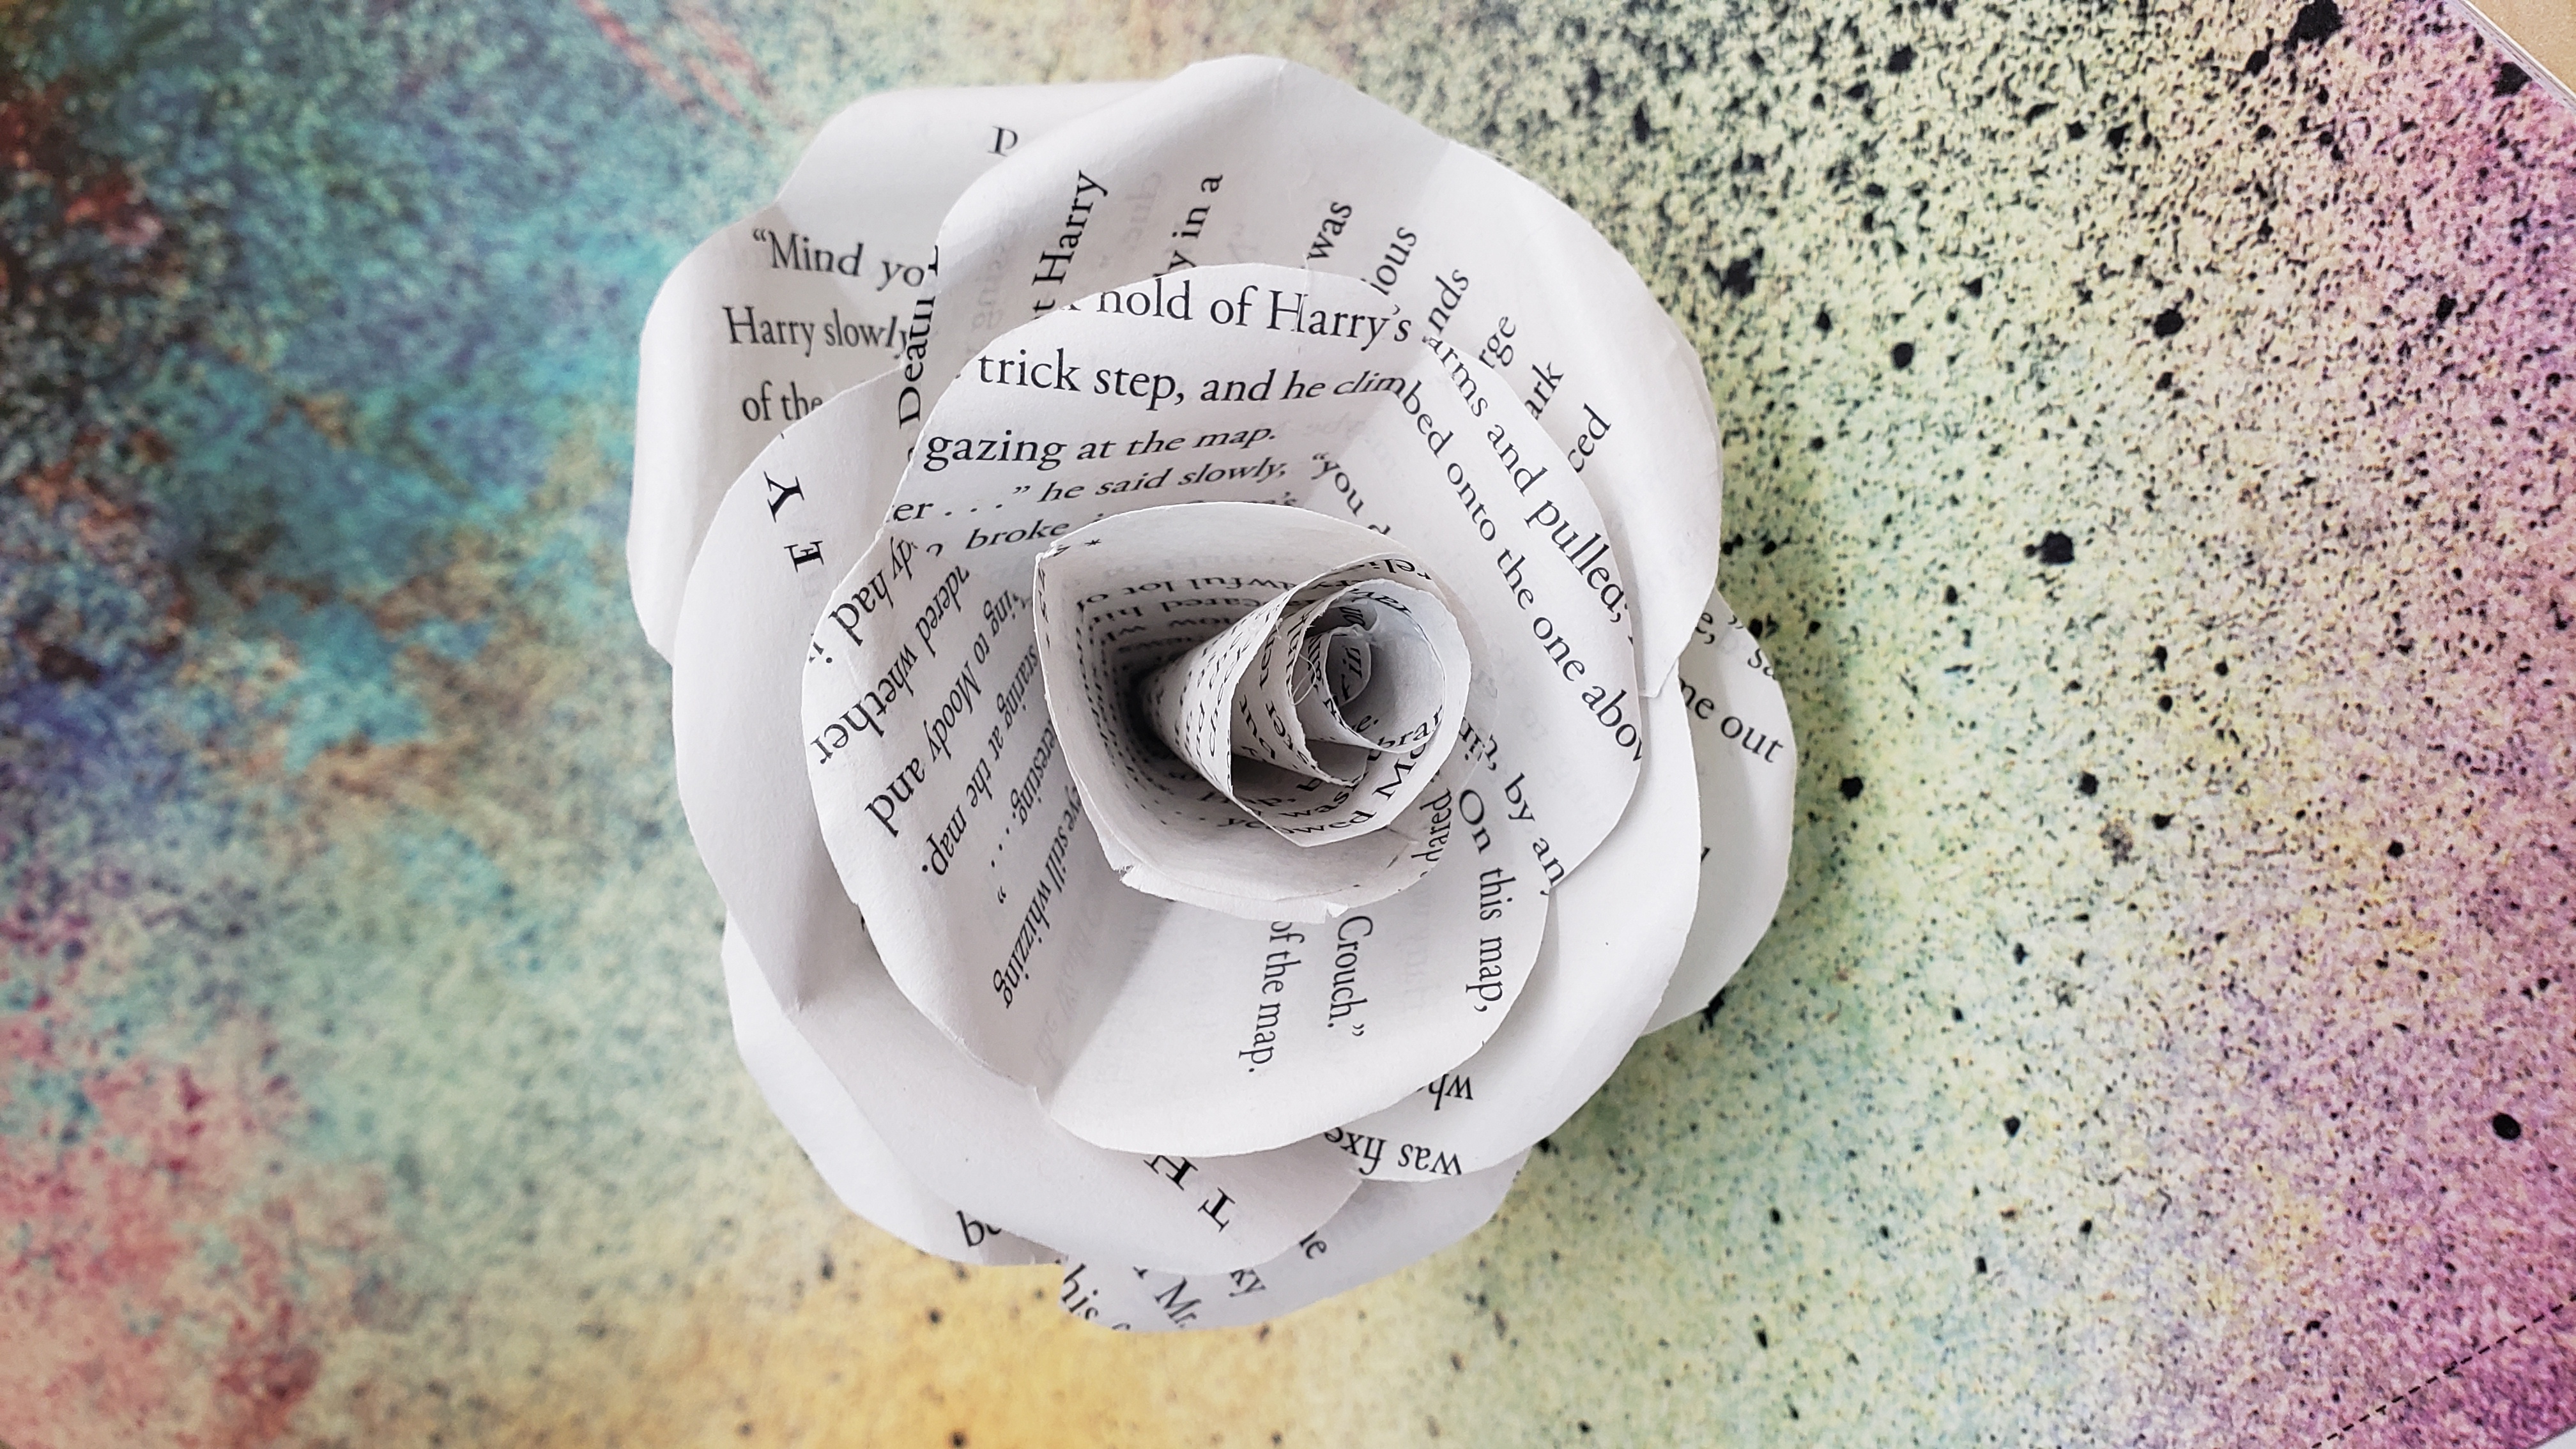 paper rose is shown with book page text